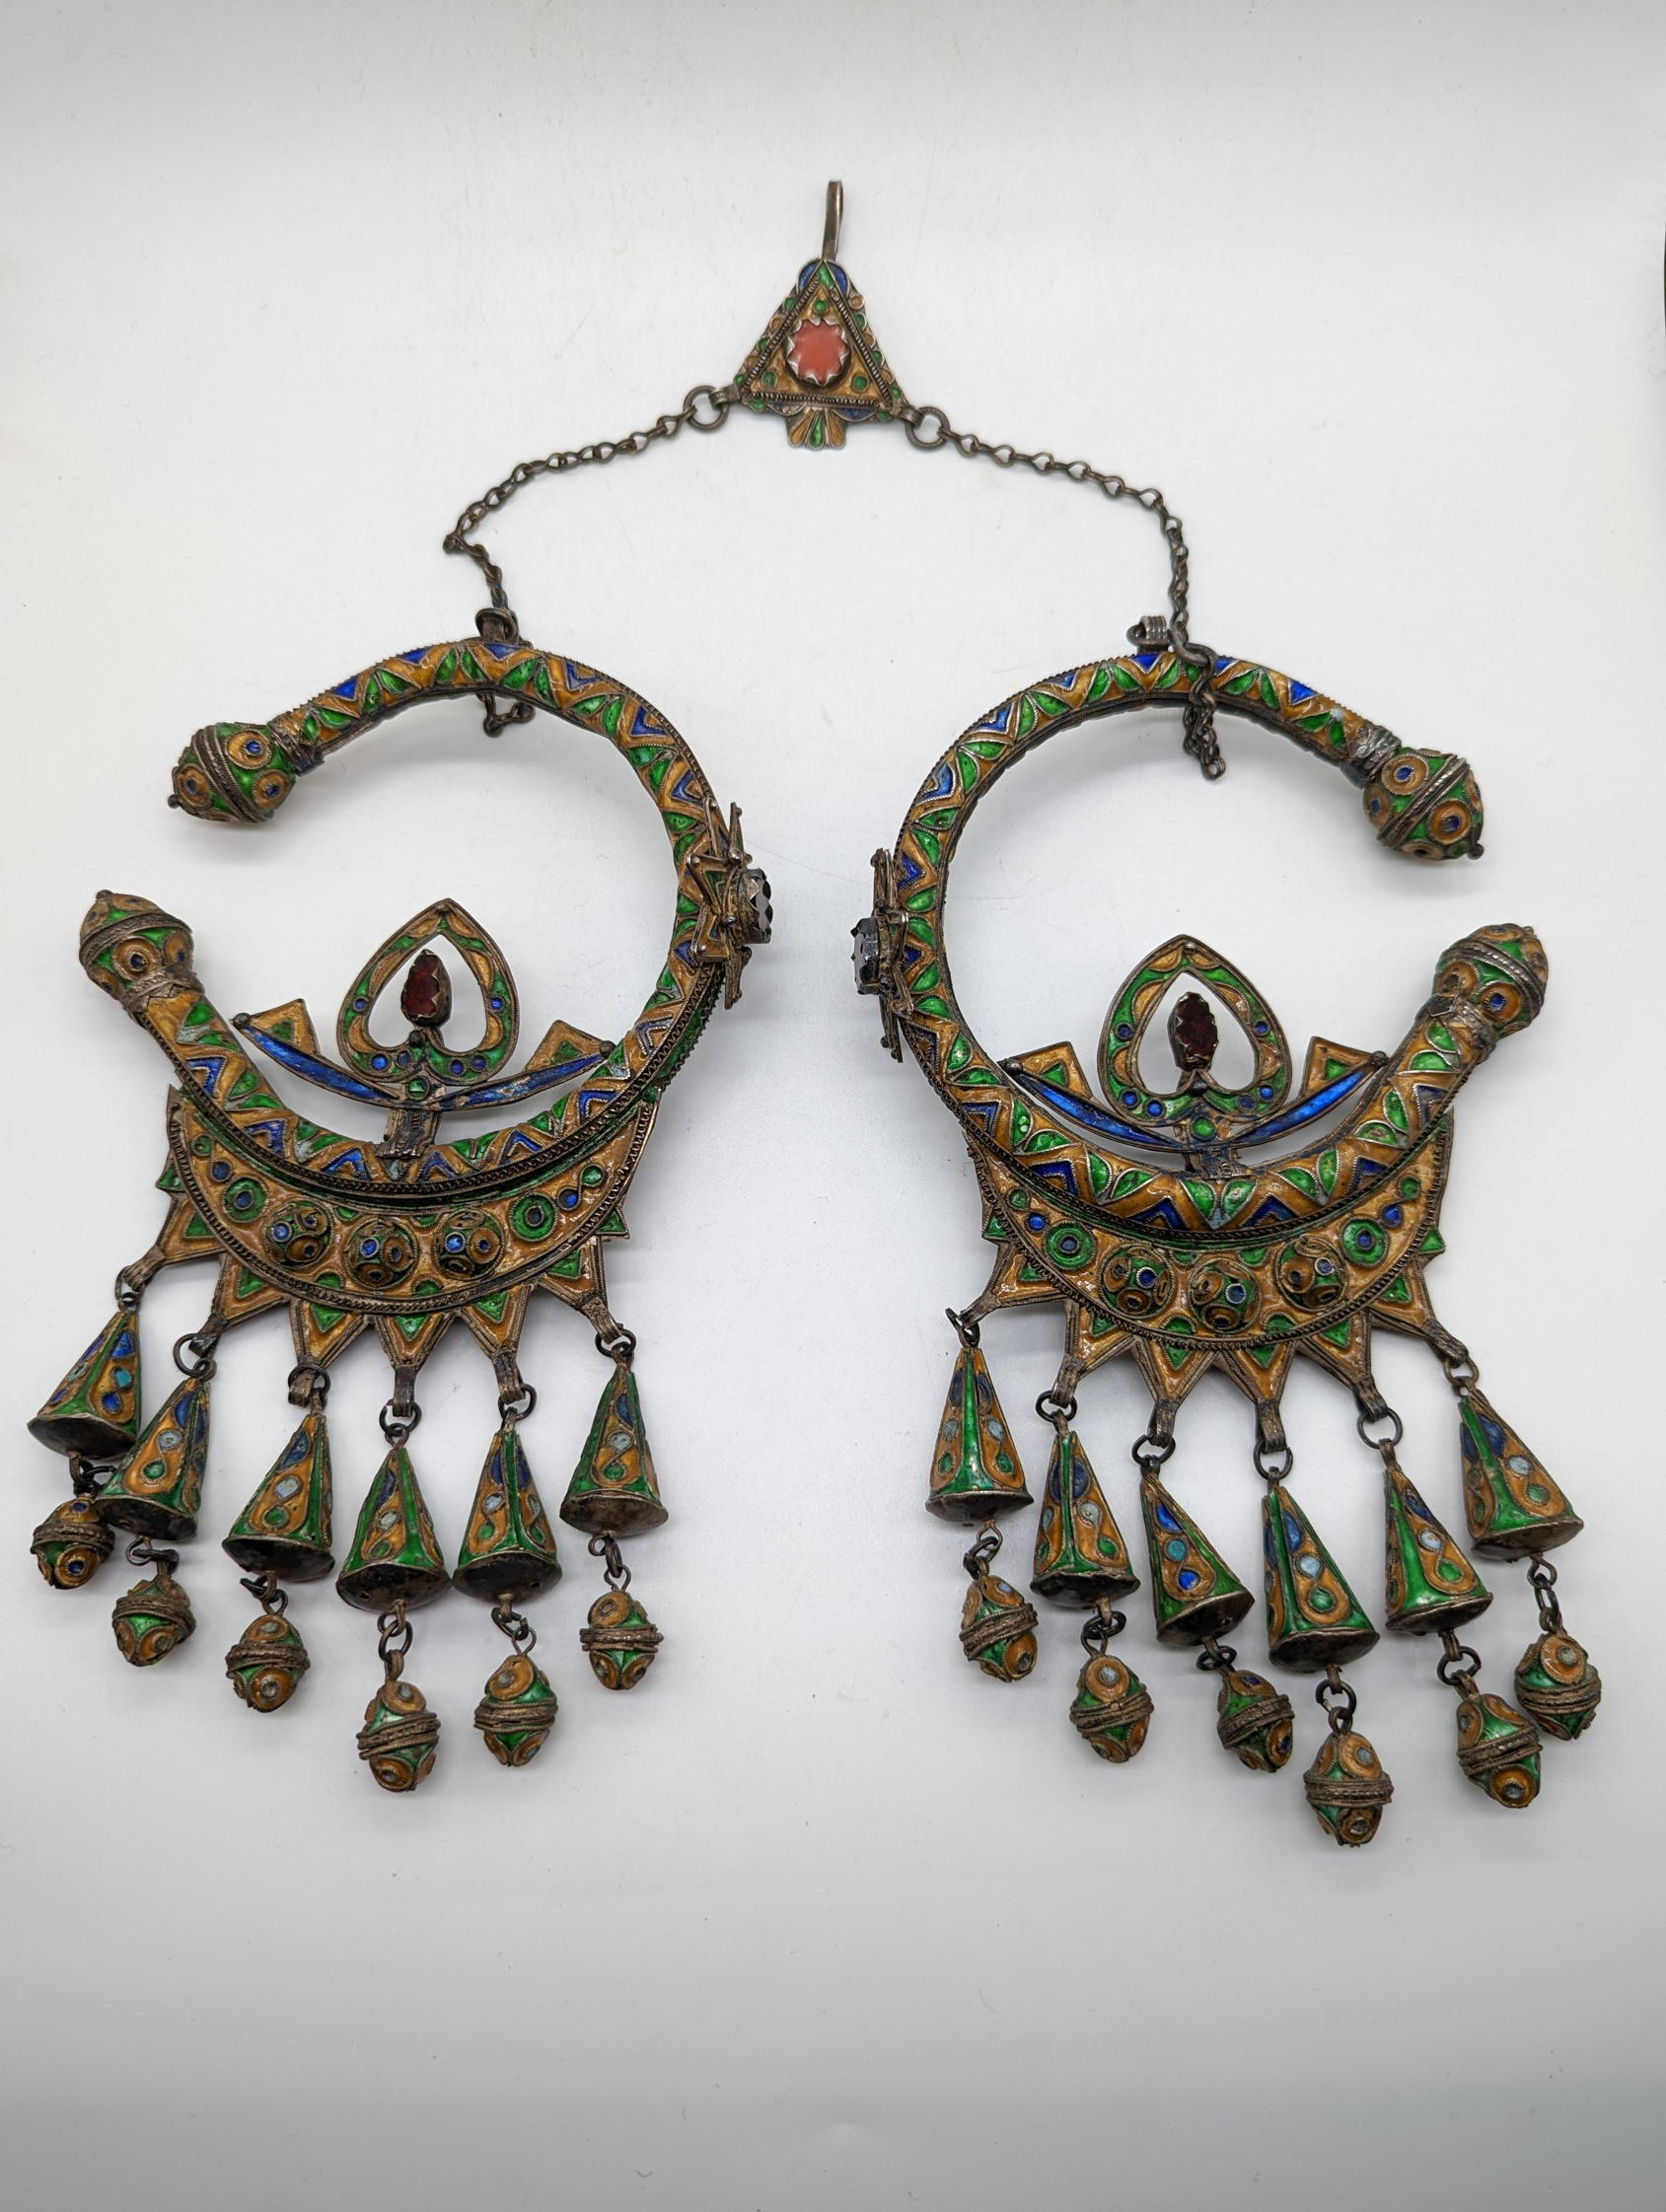 A pair of Moroccan Berber silver headdresses, enamelled with ornaments and chains